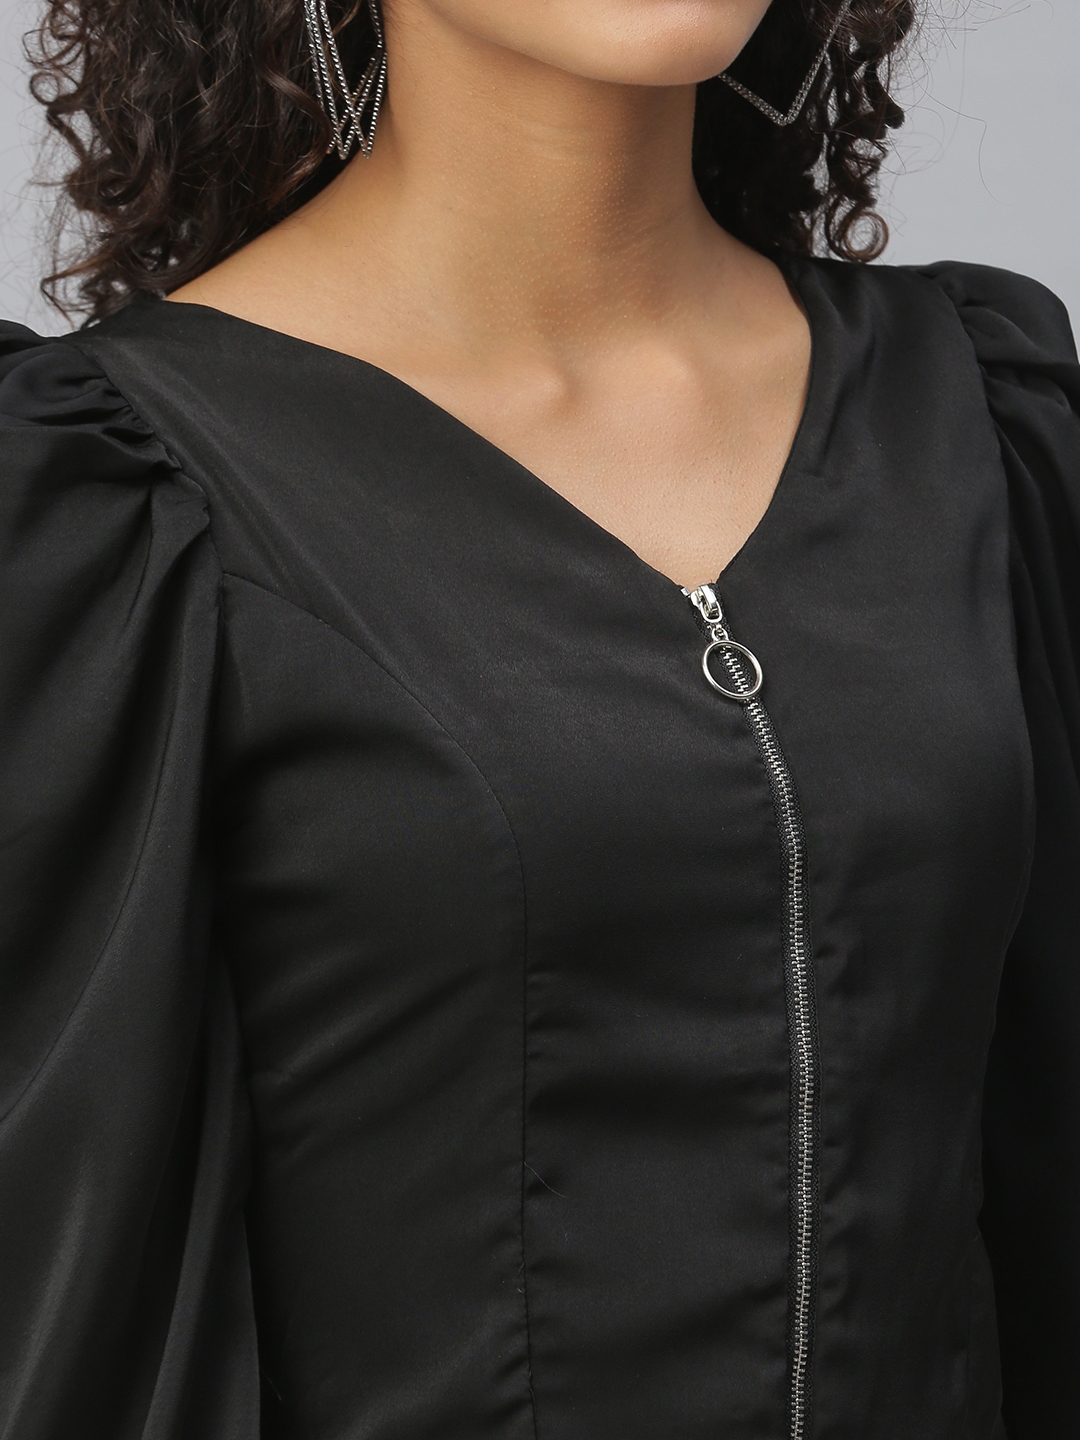 Women's Black Polyester Solid Tops